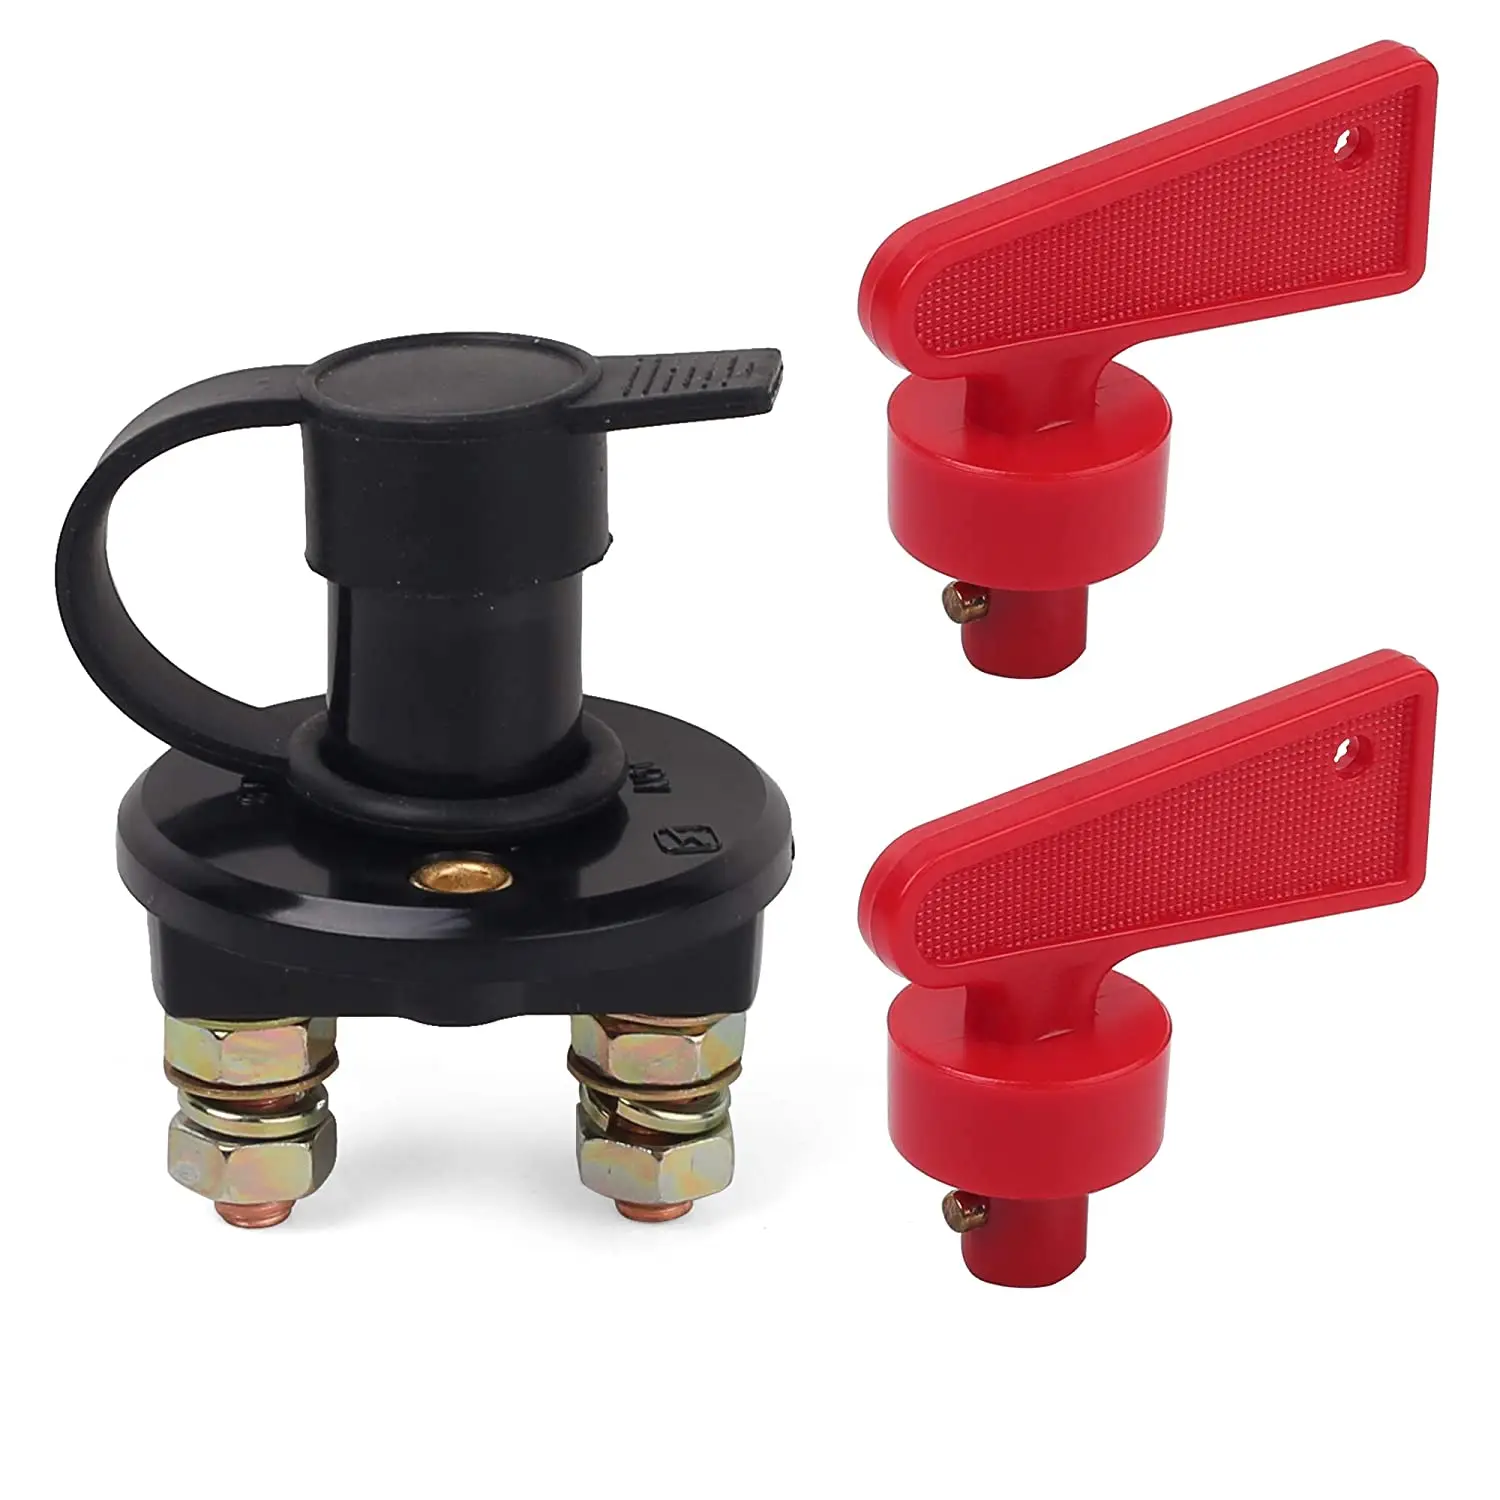 ivolks Boat Battery Switch Disconnect Master Isolator Cut On/Off Disconnect Switch for RV Marine Boat Car 